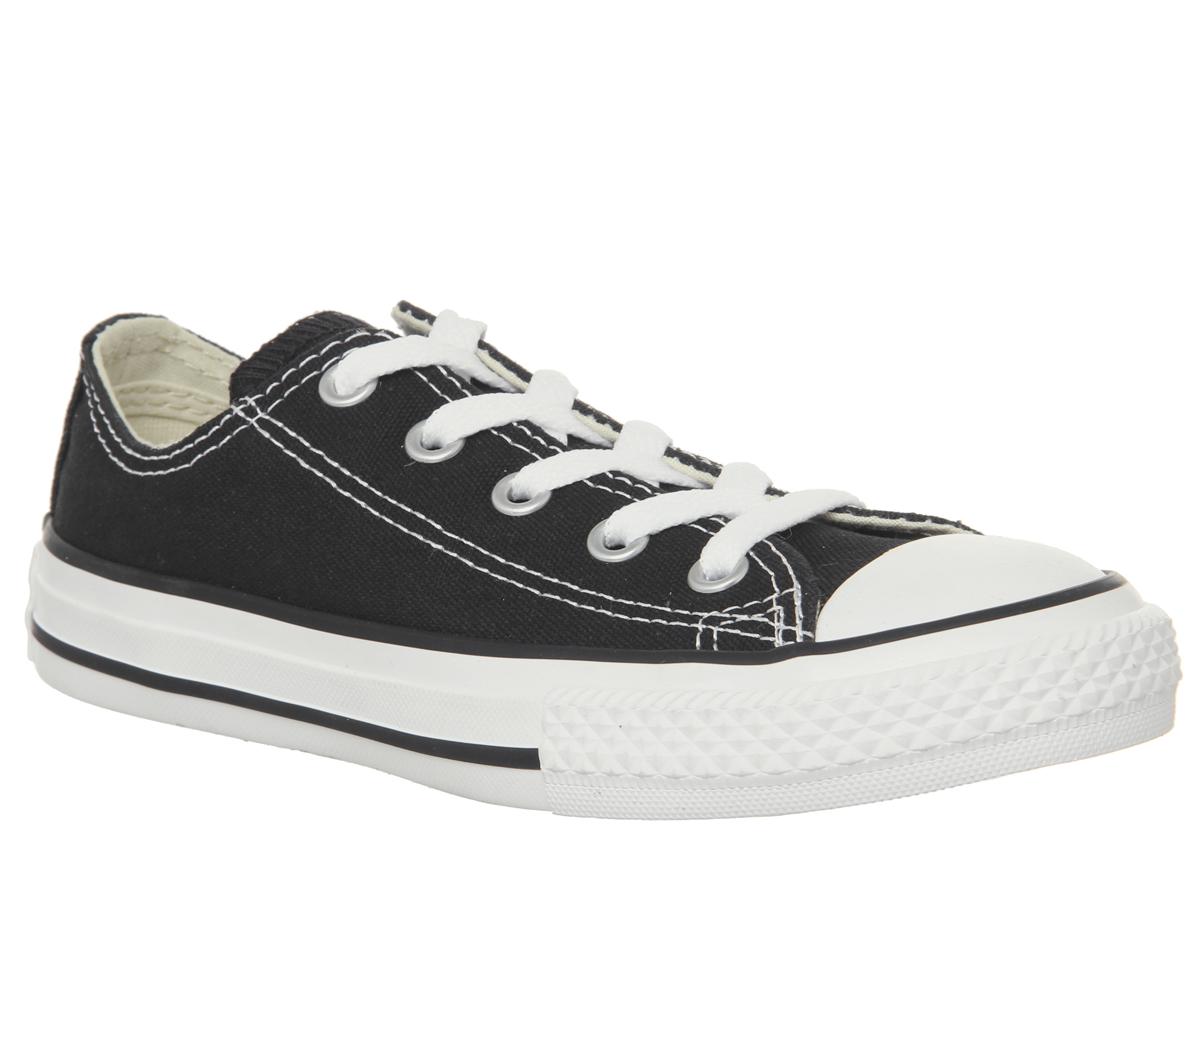 Converse All Star Low Youth Trainers Black White - Unisex